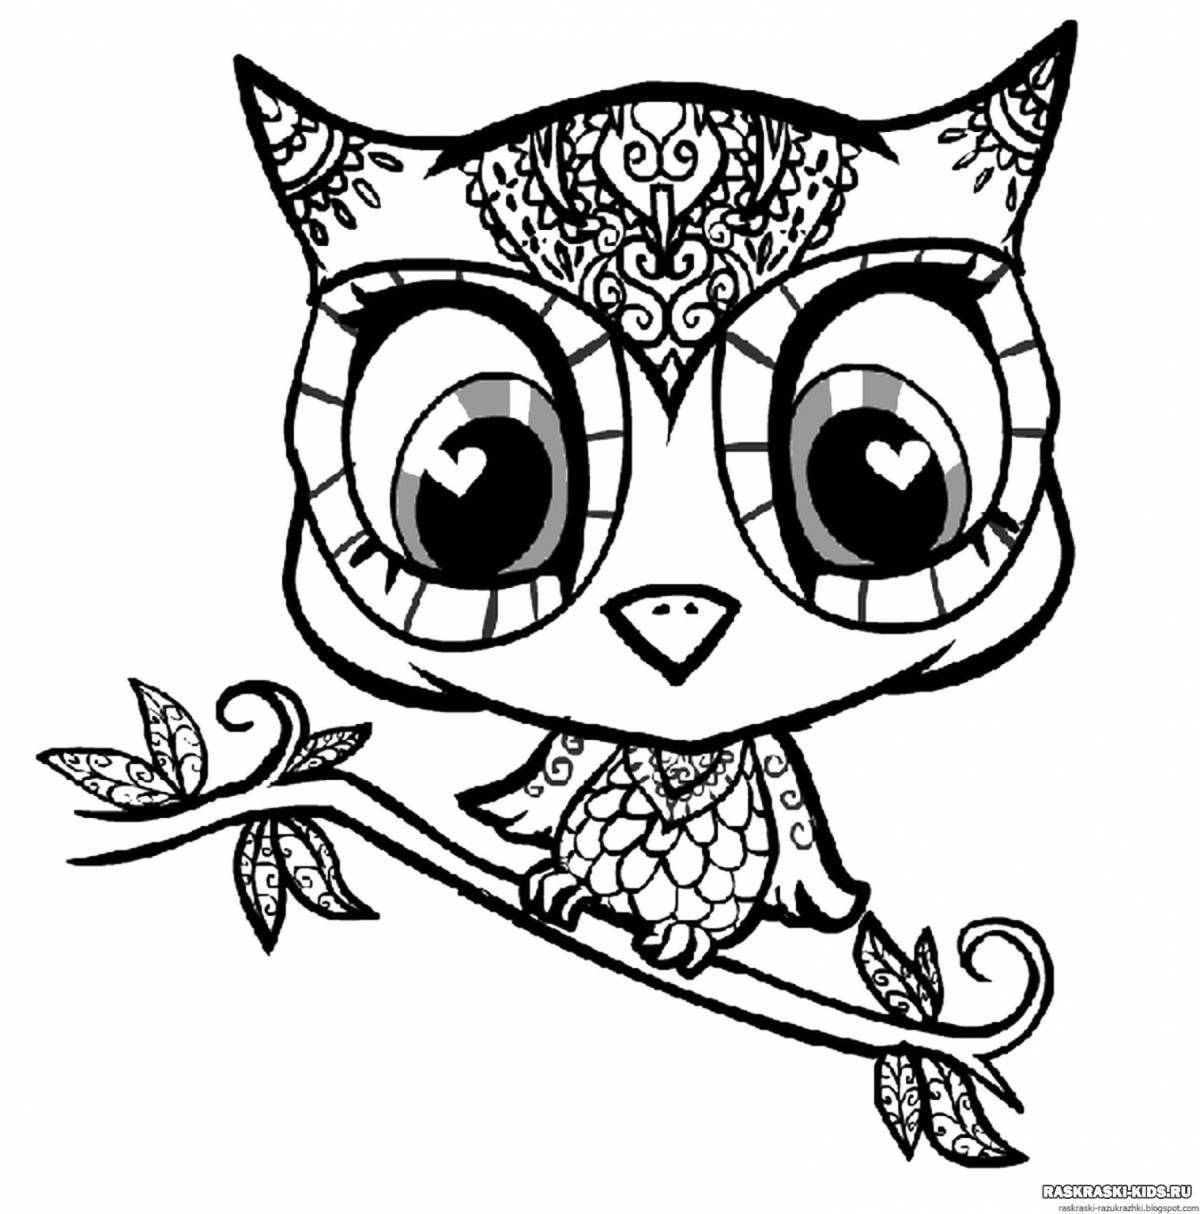 Luminous coloring pages for girls 12 years old with animals